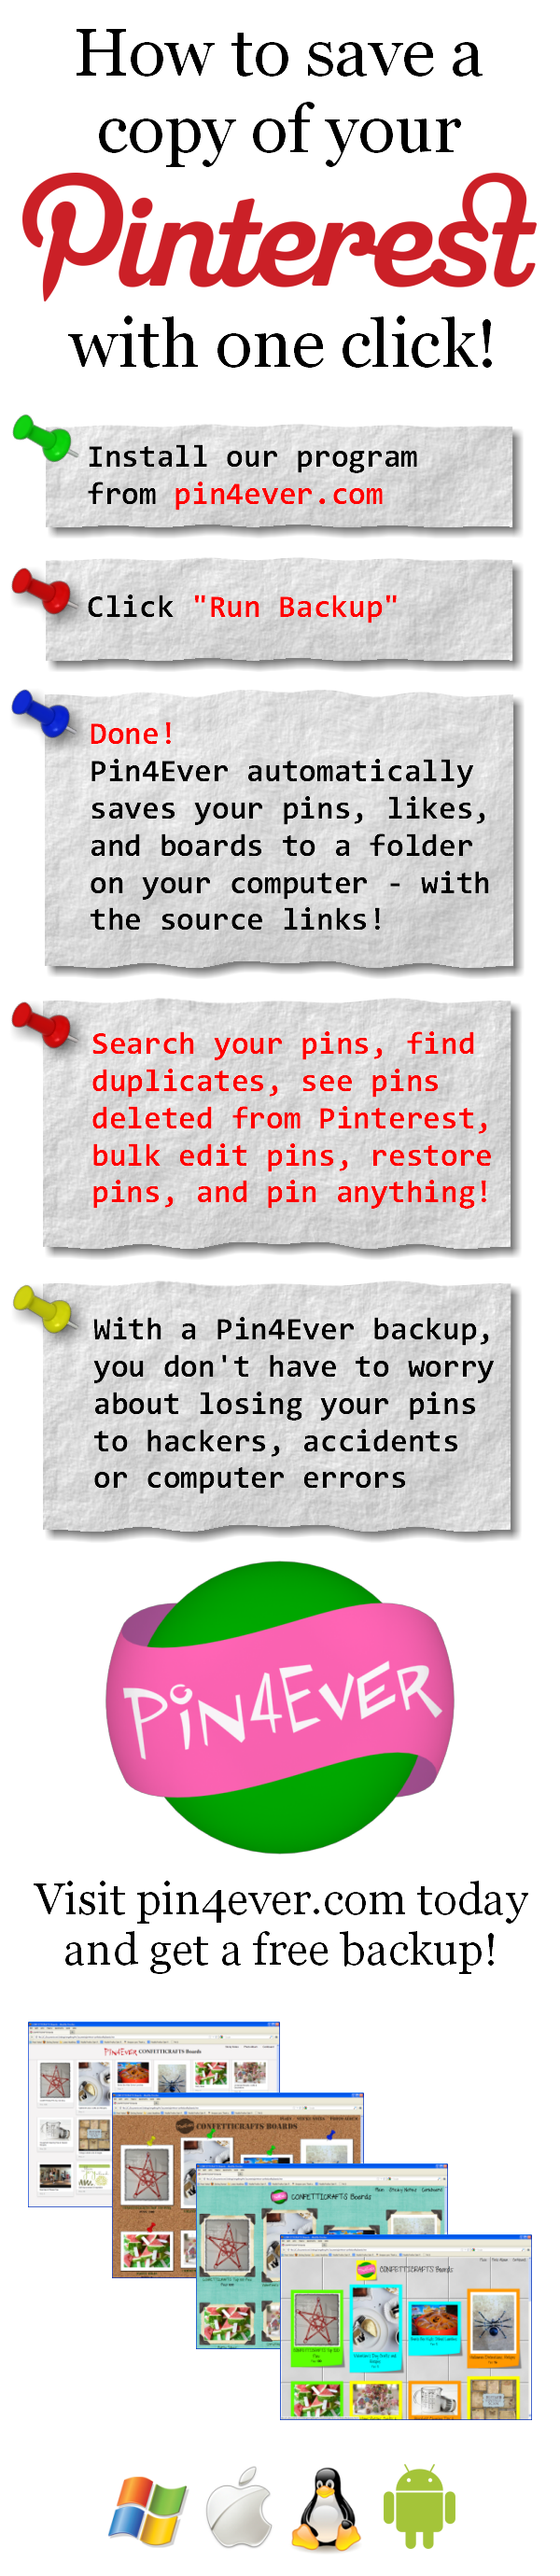 Are your pins protected? Pin4Ever has saved, edited or uploaded 476,632,898 pins since September 2012. Go to pin4ever.com and try it free!